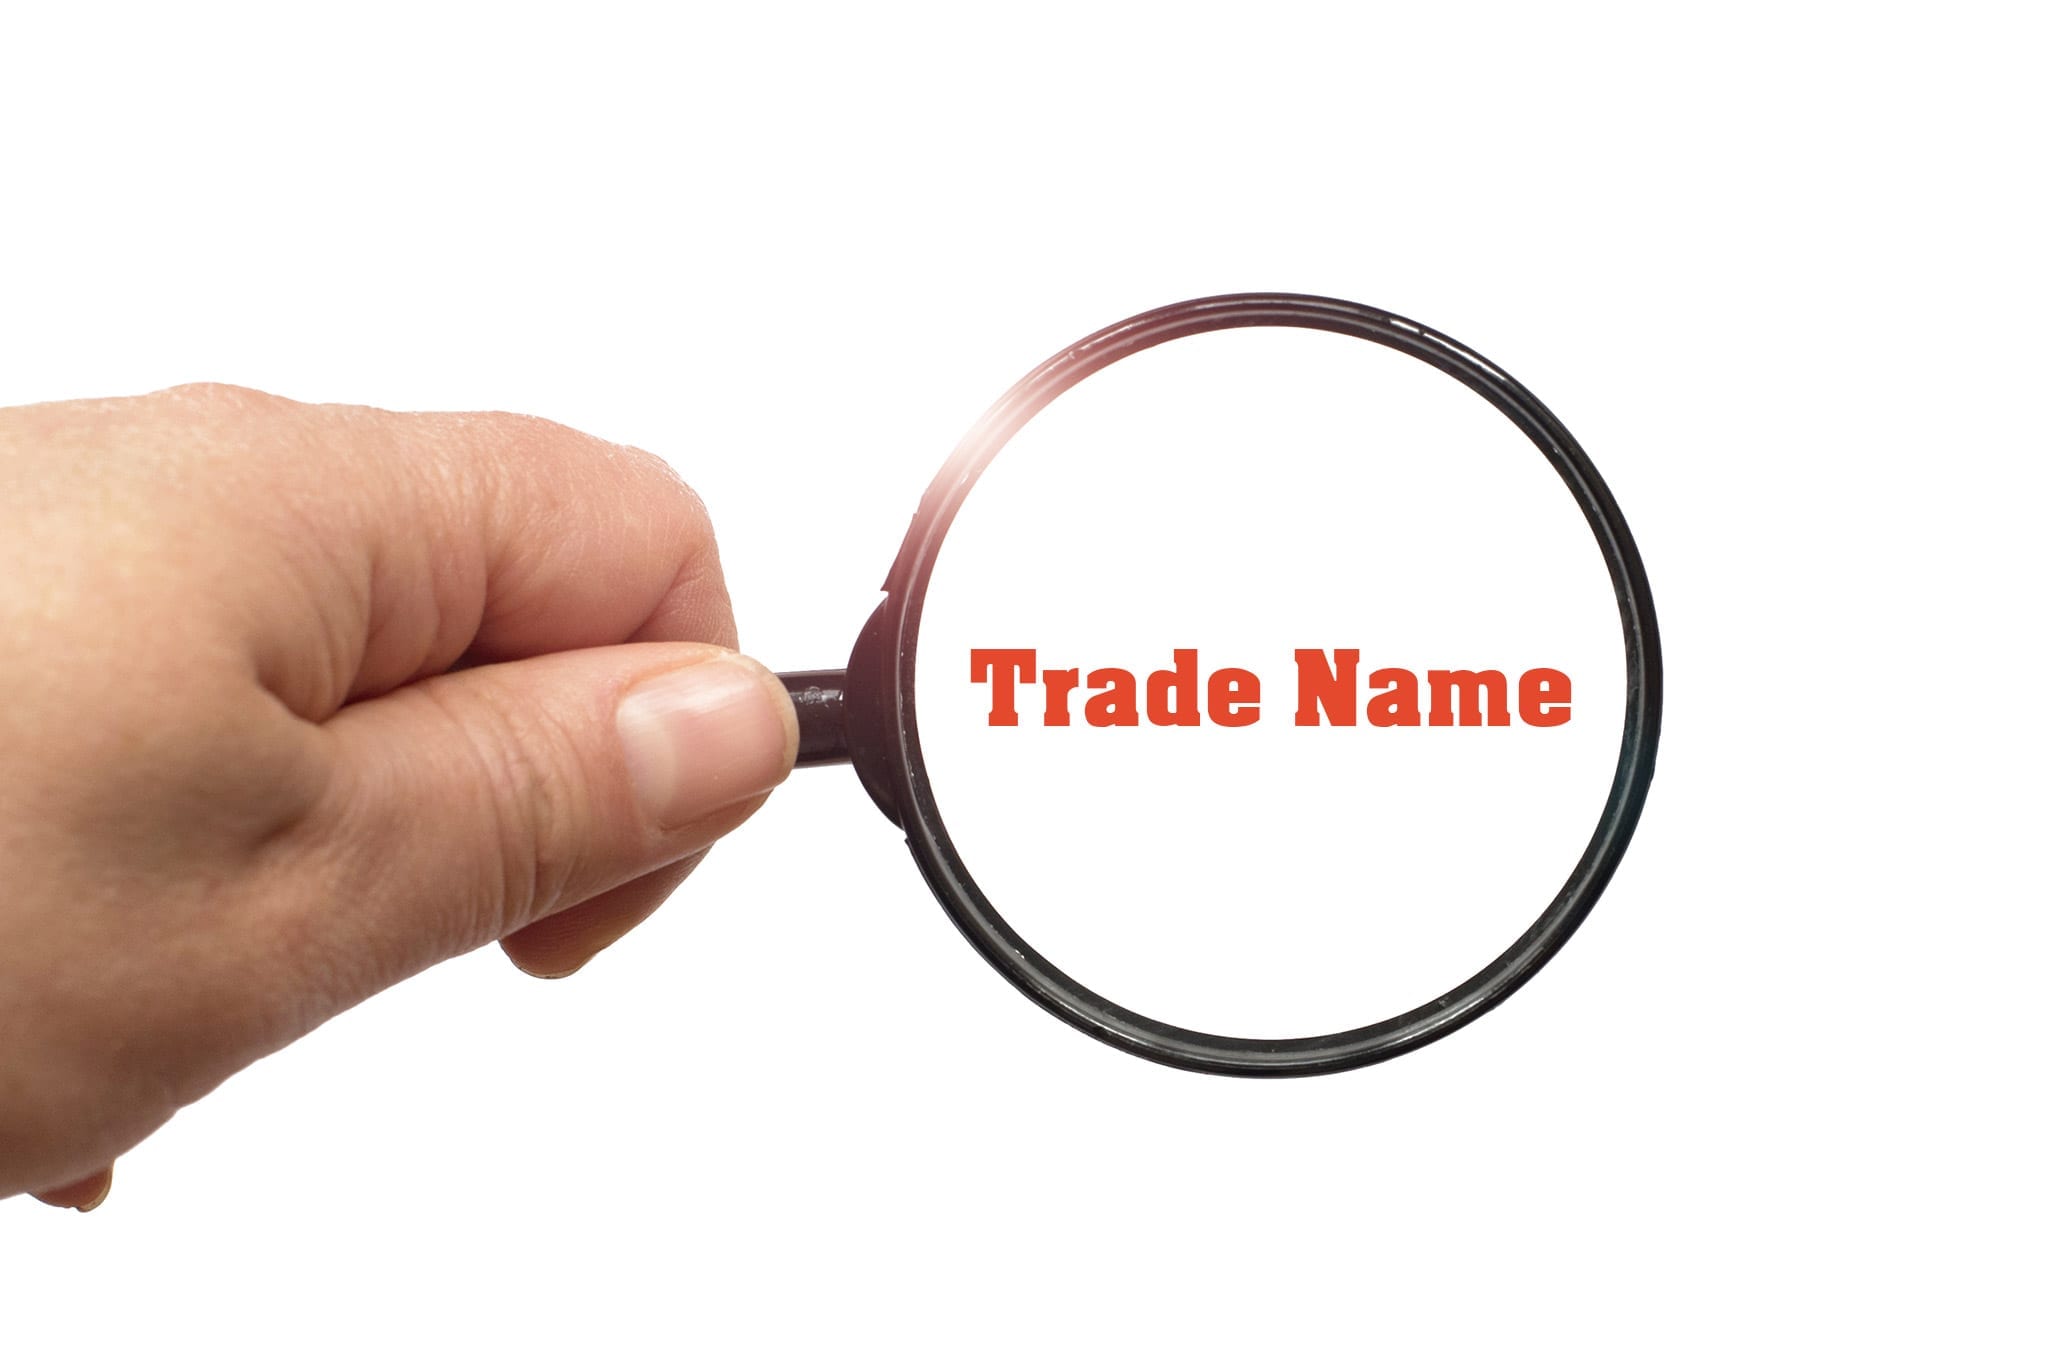 Trade Name Secrets to Make You Launch a Billion Dollar Business